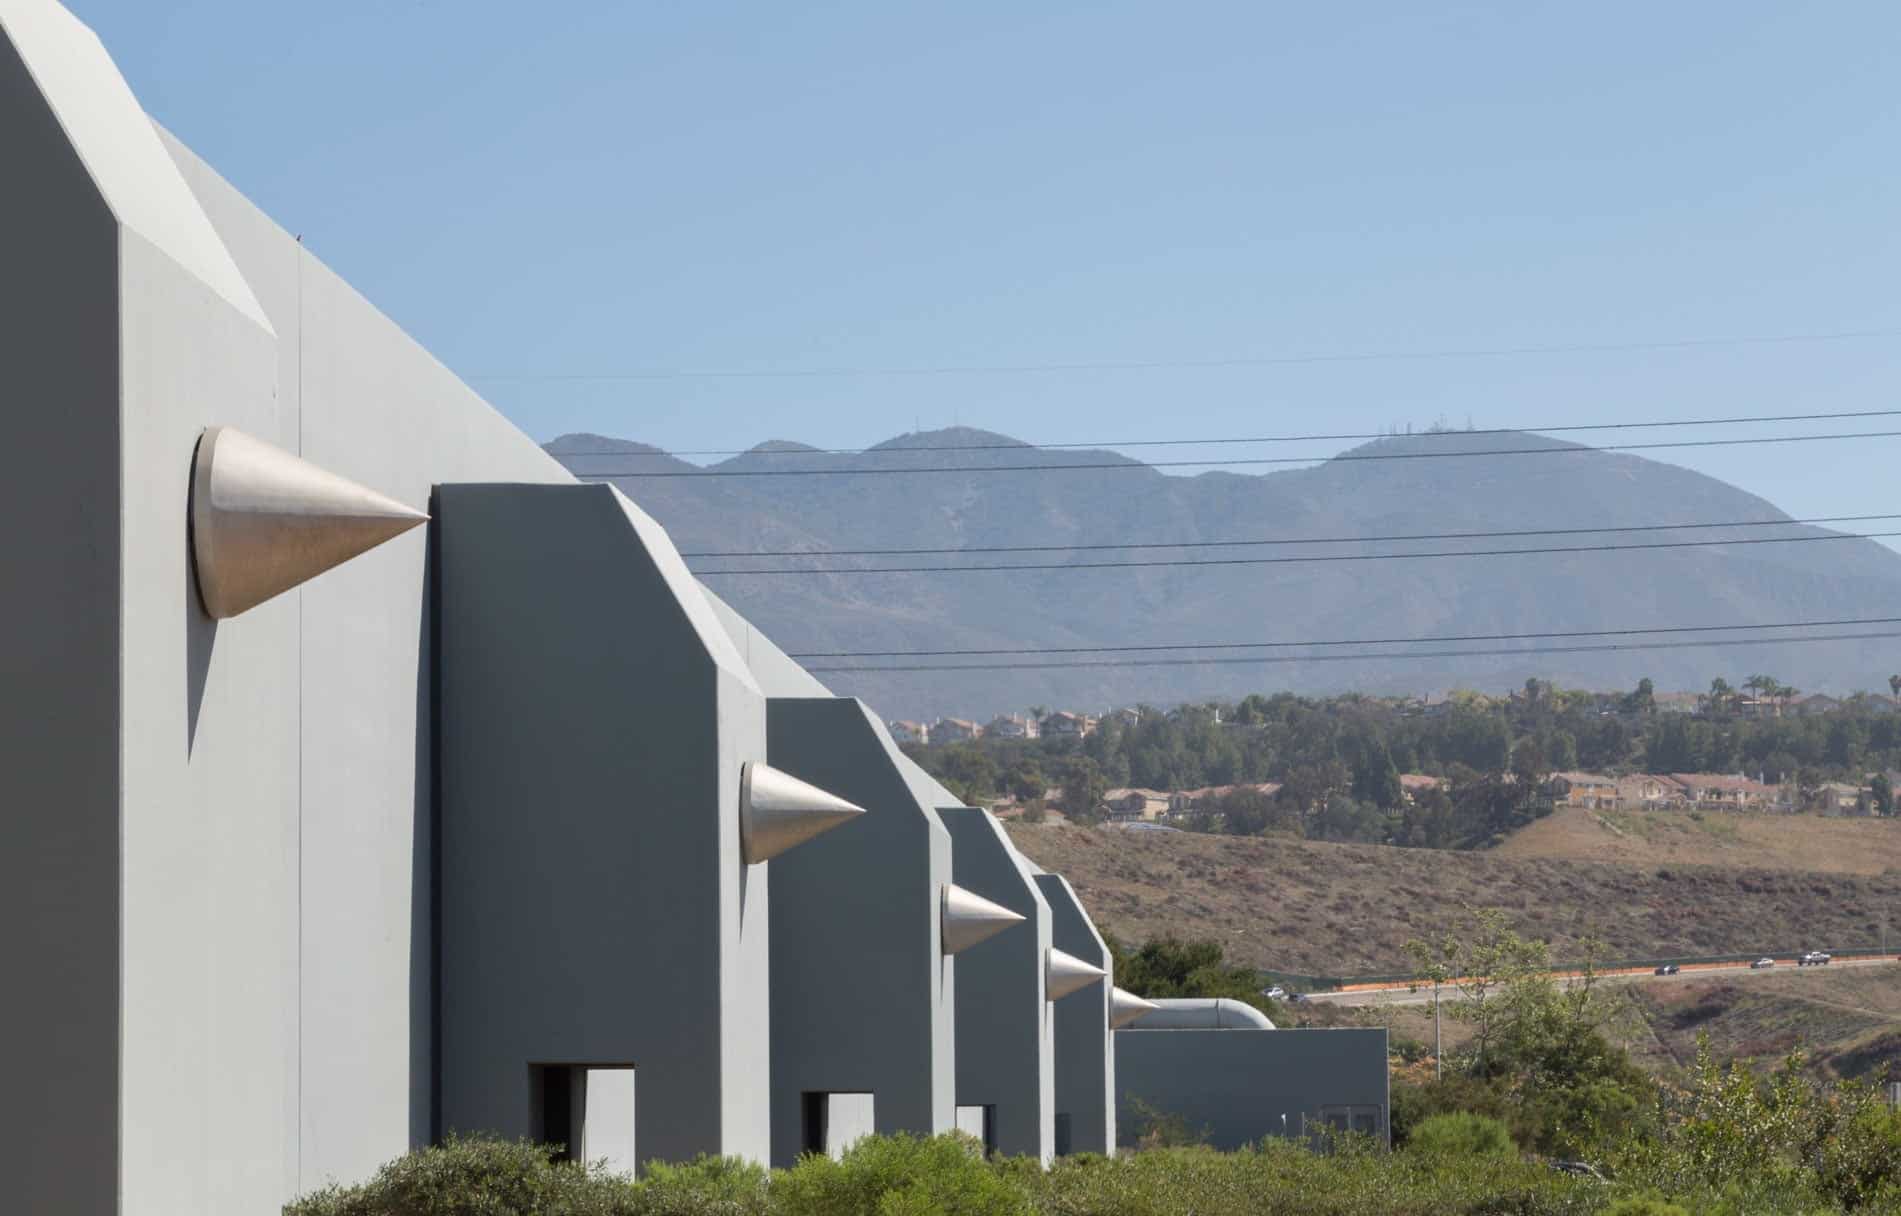 Oakley Headquarters in Foothill Ranch, California.